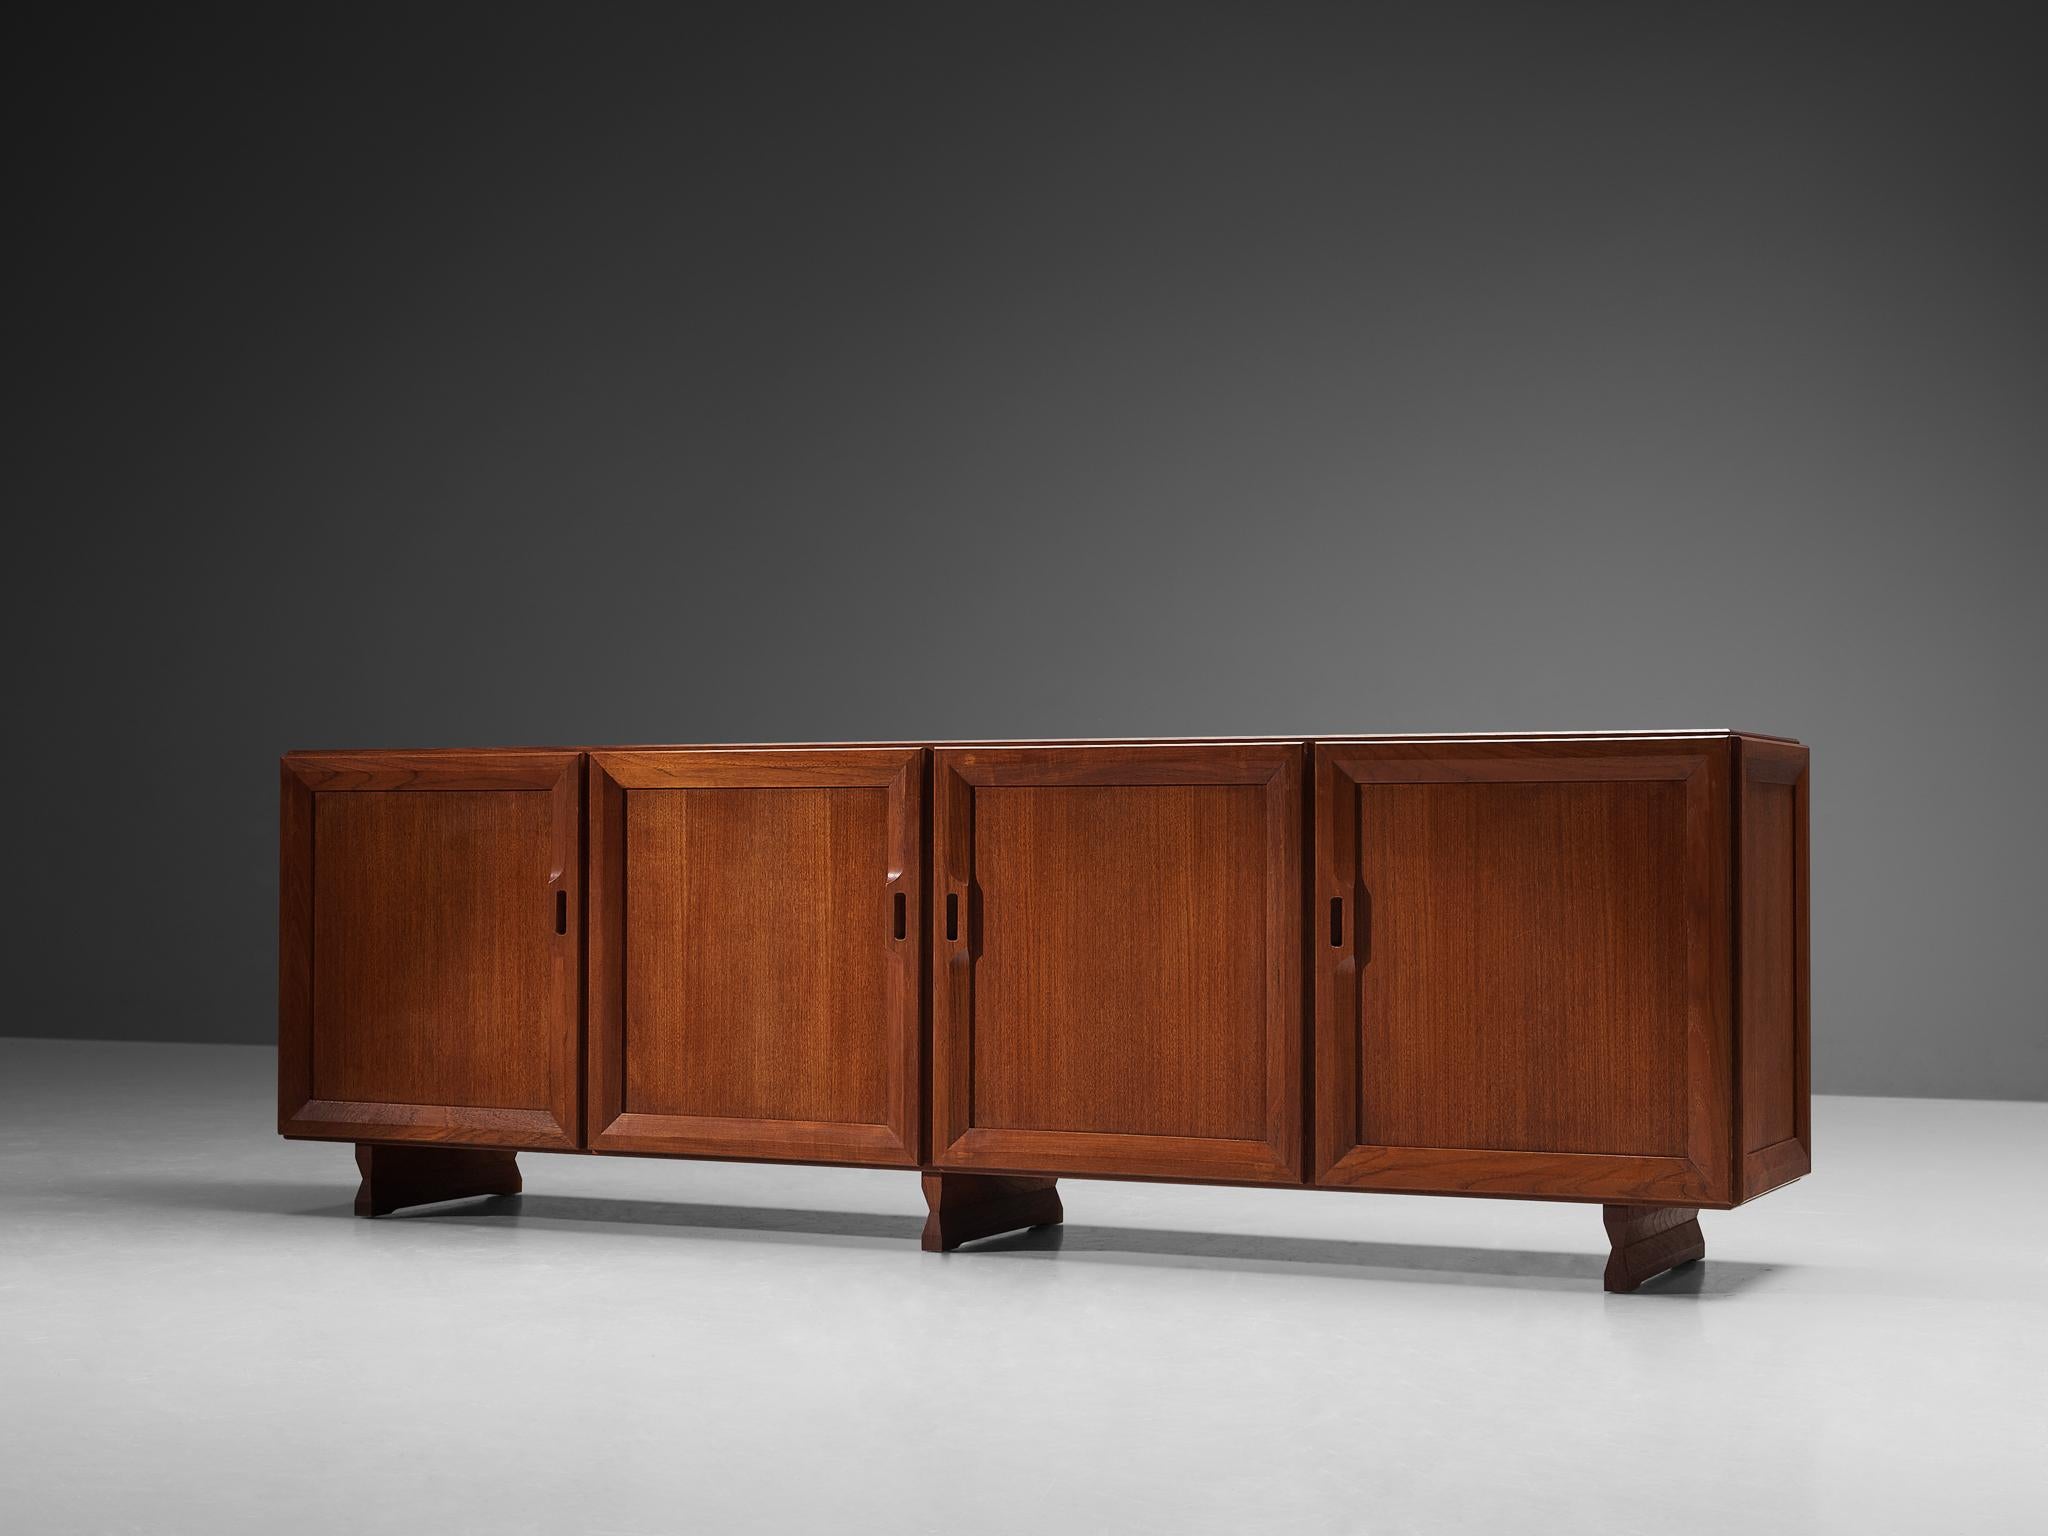 Franco Albini for Poggi, sideboard model MB 15, teak, Italy, design 1957

Well-designed sizable sideboard by Franco Albini for Poggi in the 1950s in Italy. This design features a simplistic aesthetic with sharp lines. This modern sideboard has four